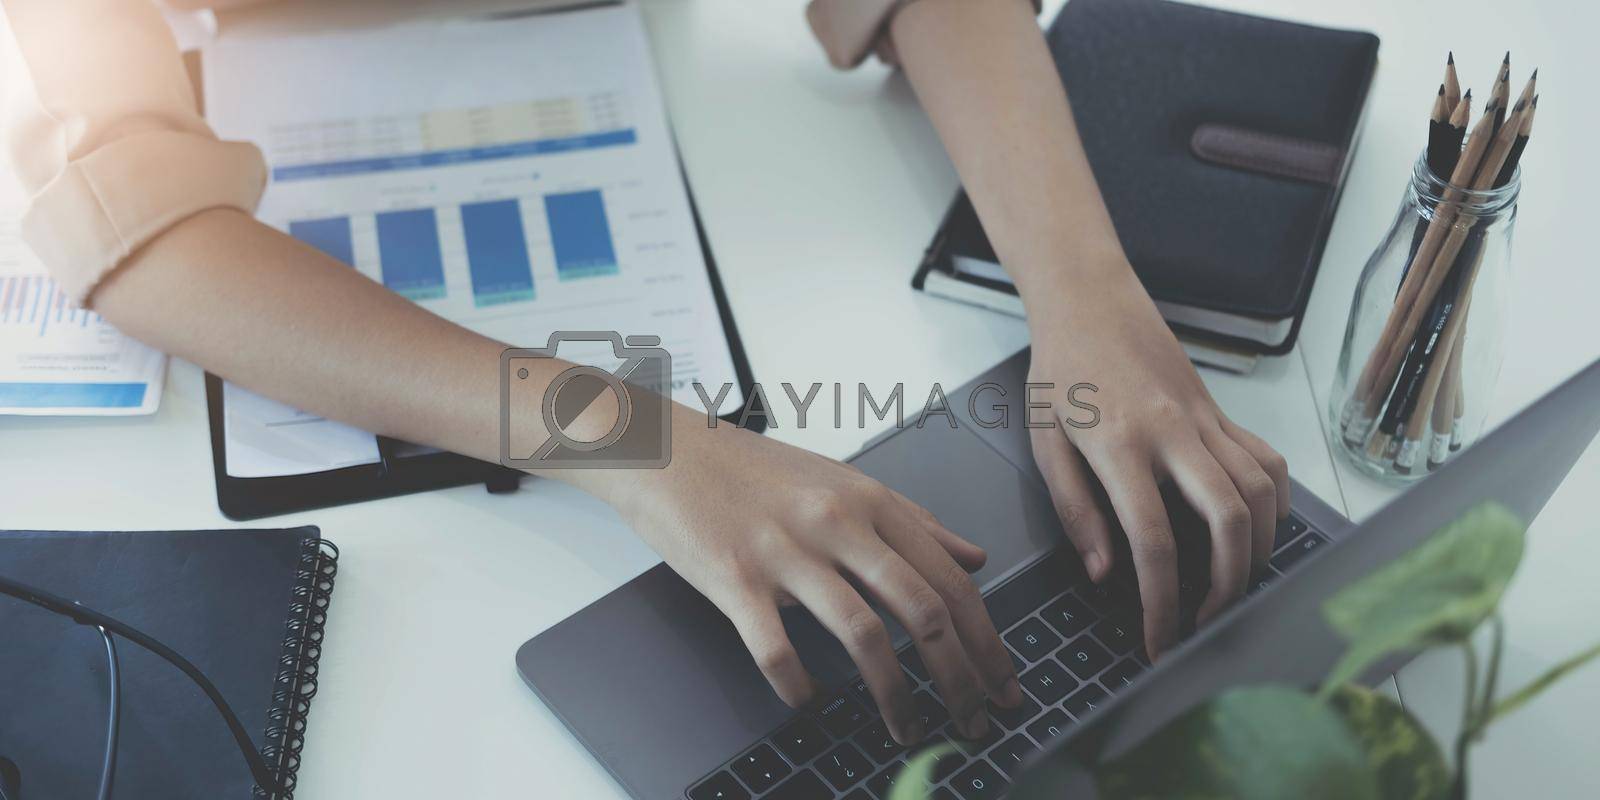 Royalty free image of Business woman sitting using laptop computer with on the desk in the office. by wichayada